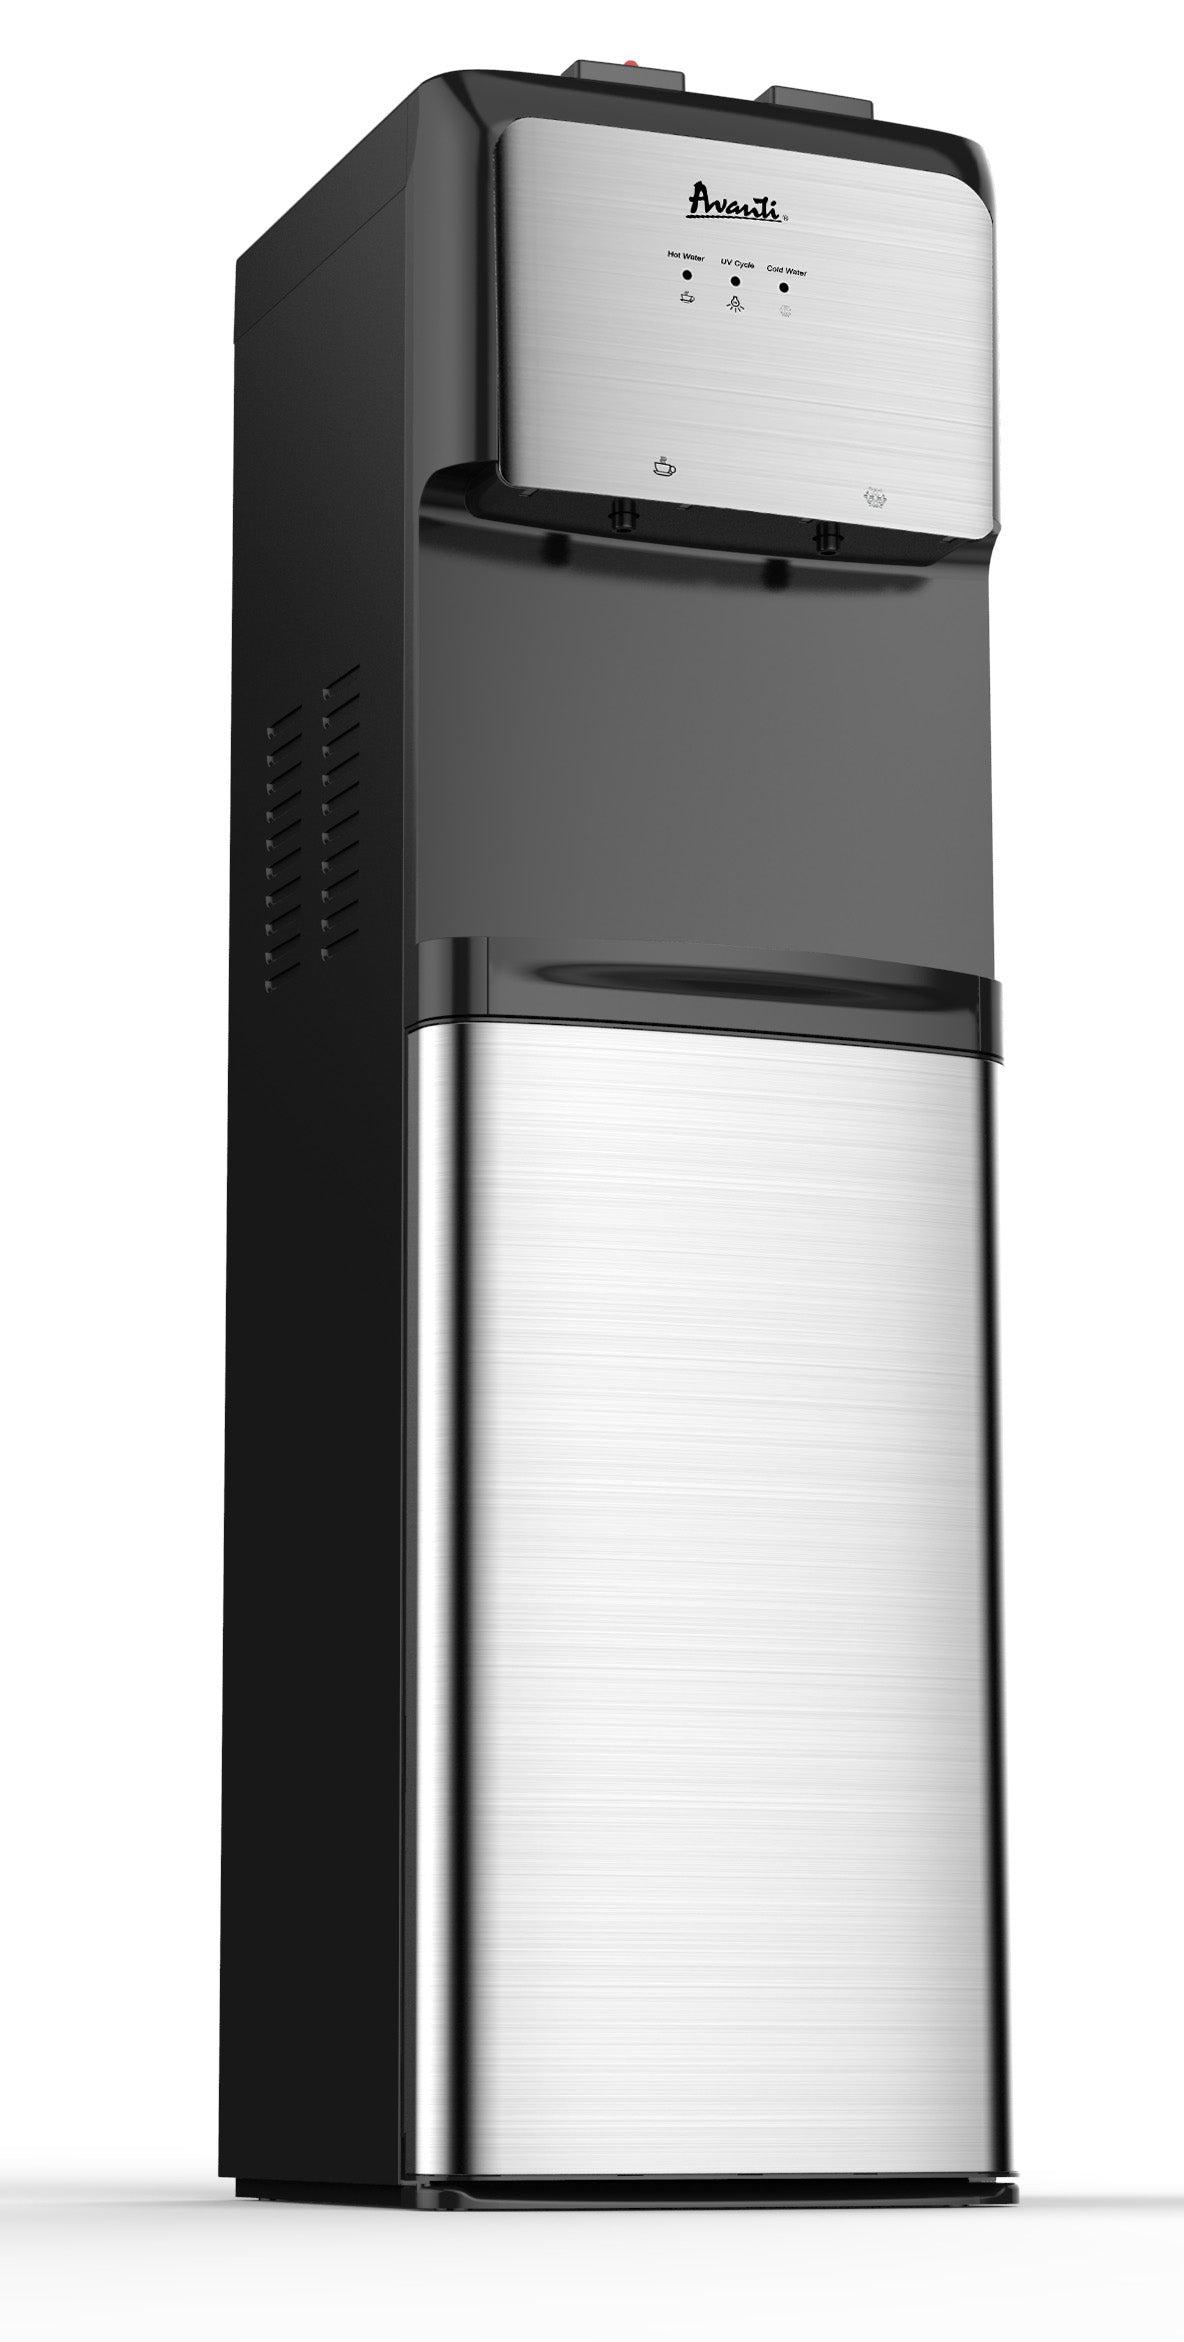 Avanti Bottom Loading Hot and Cold Water Dispenser - Black/Stainless Steel / 3 Gallons or 5 Gallons